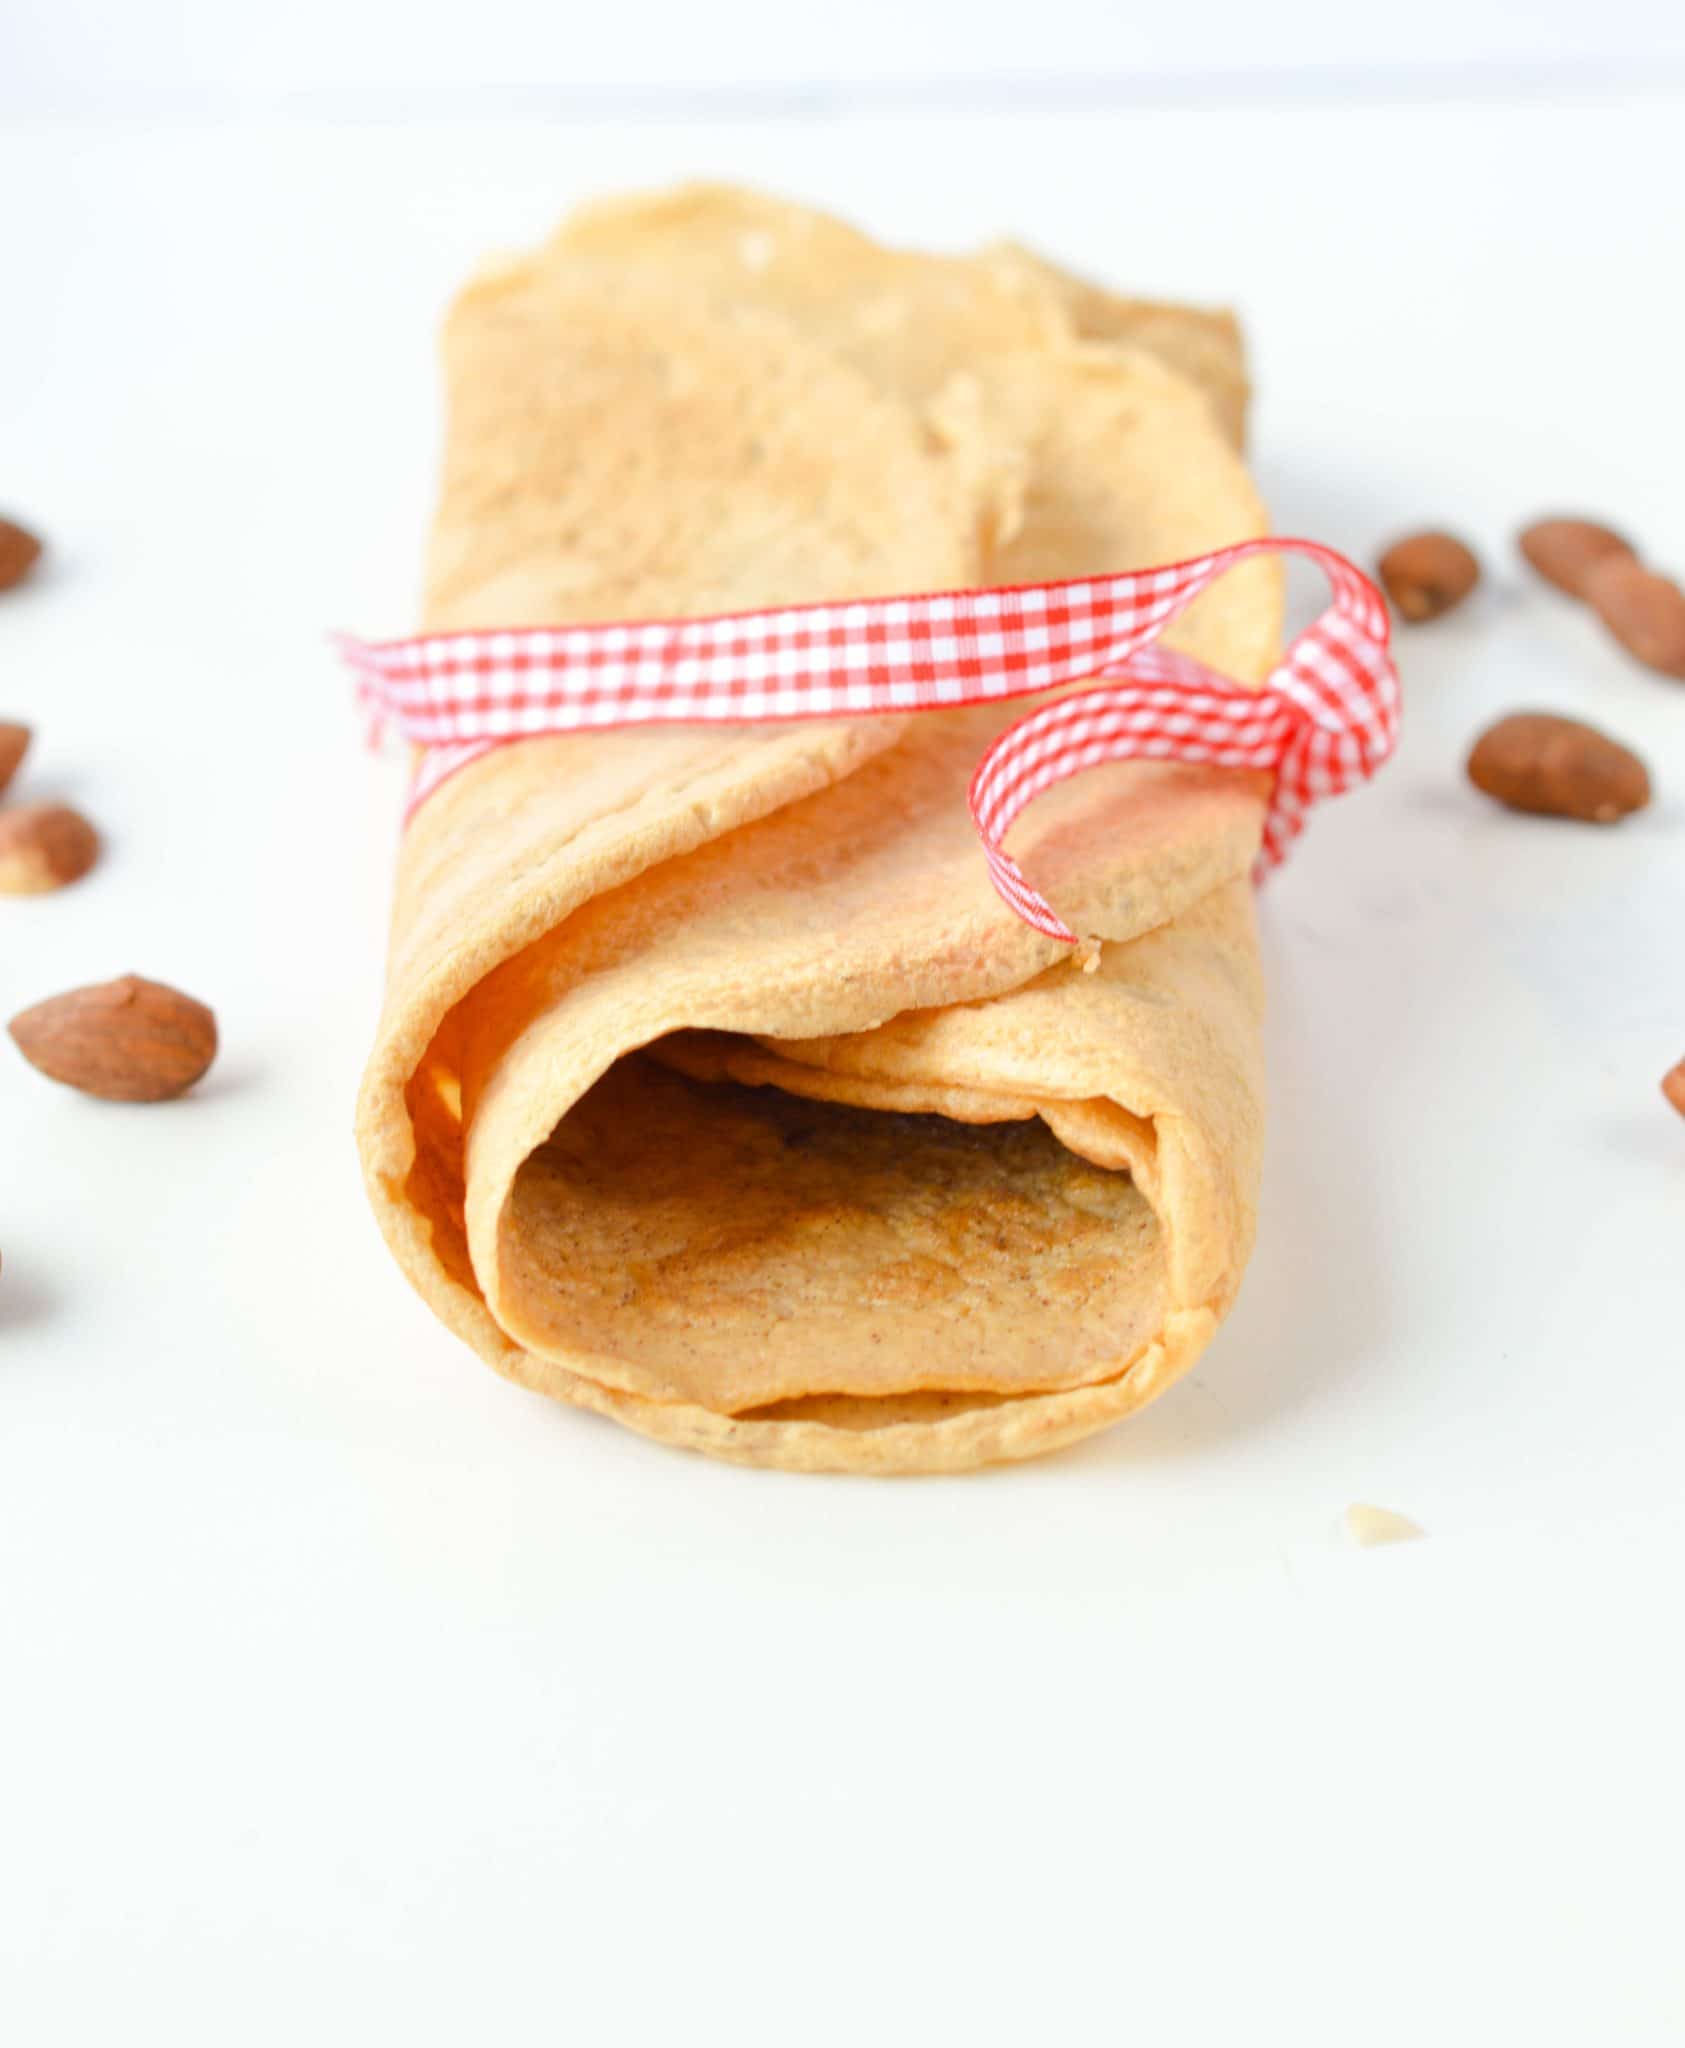 Almond Flour Crepes wrapped with a ribbon, decorated with almonds.